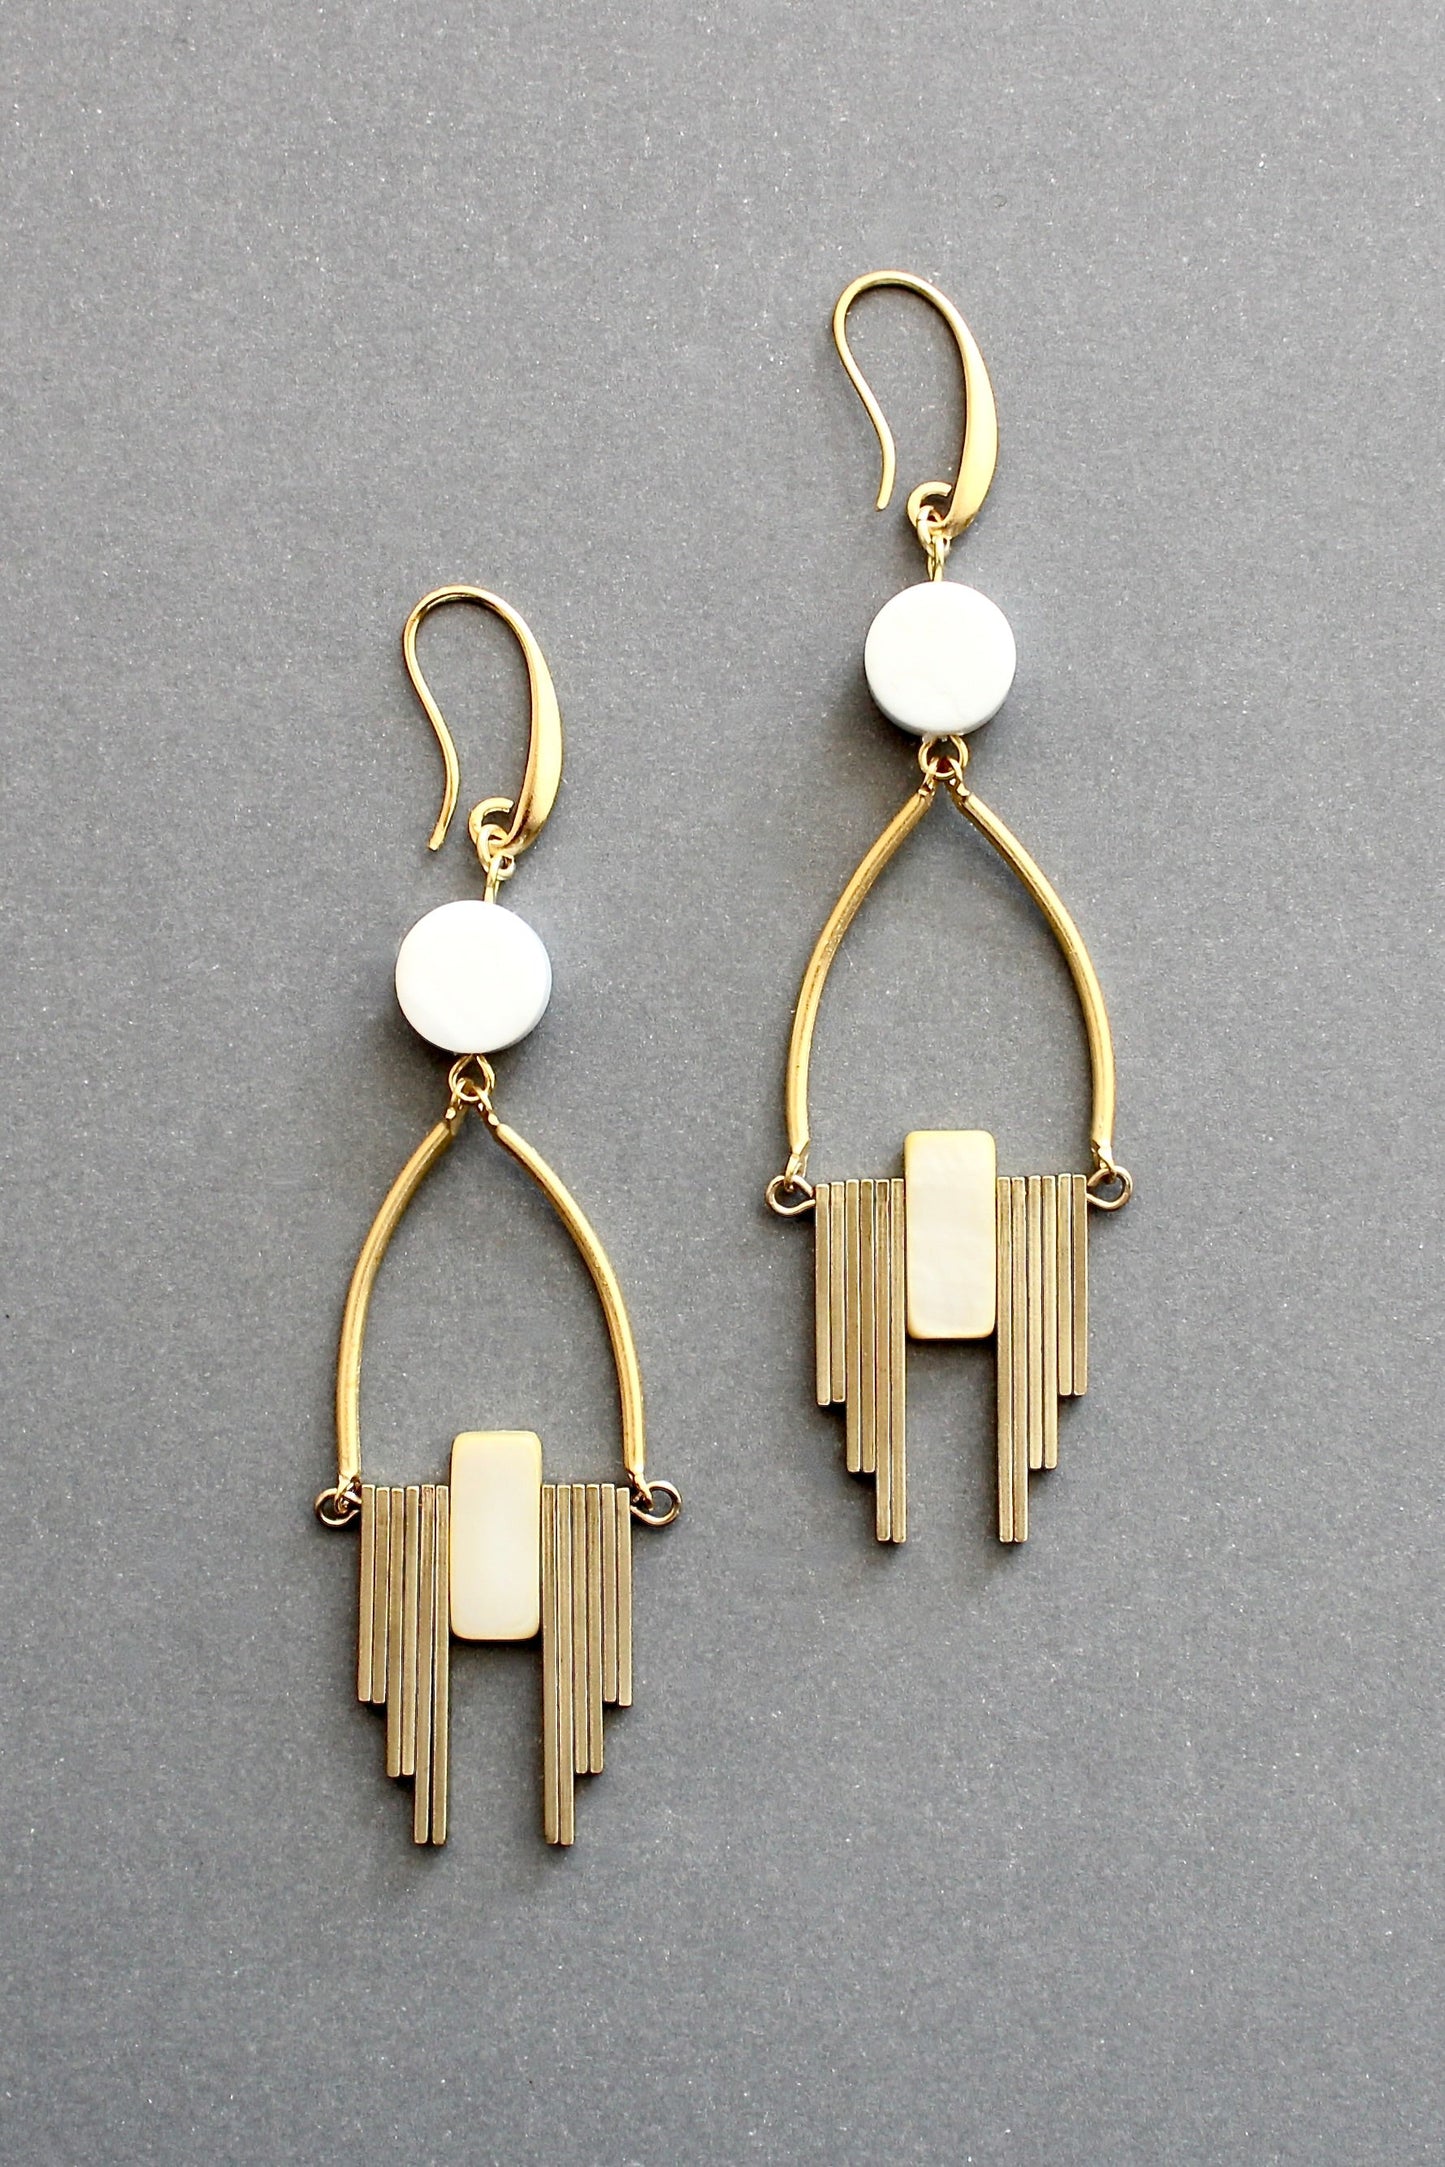 ISLE54 Magnesite and mother-of-pearls Artdeco earrings